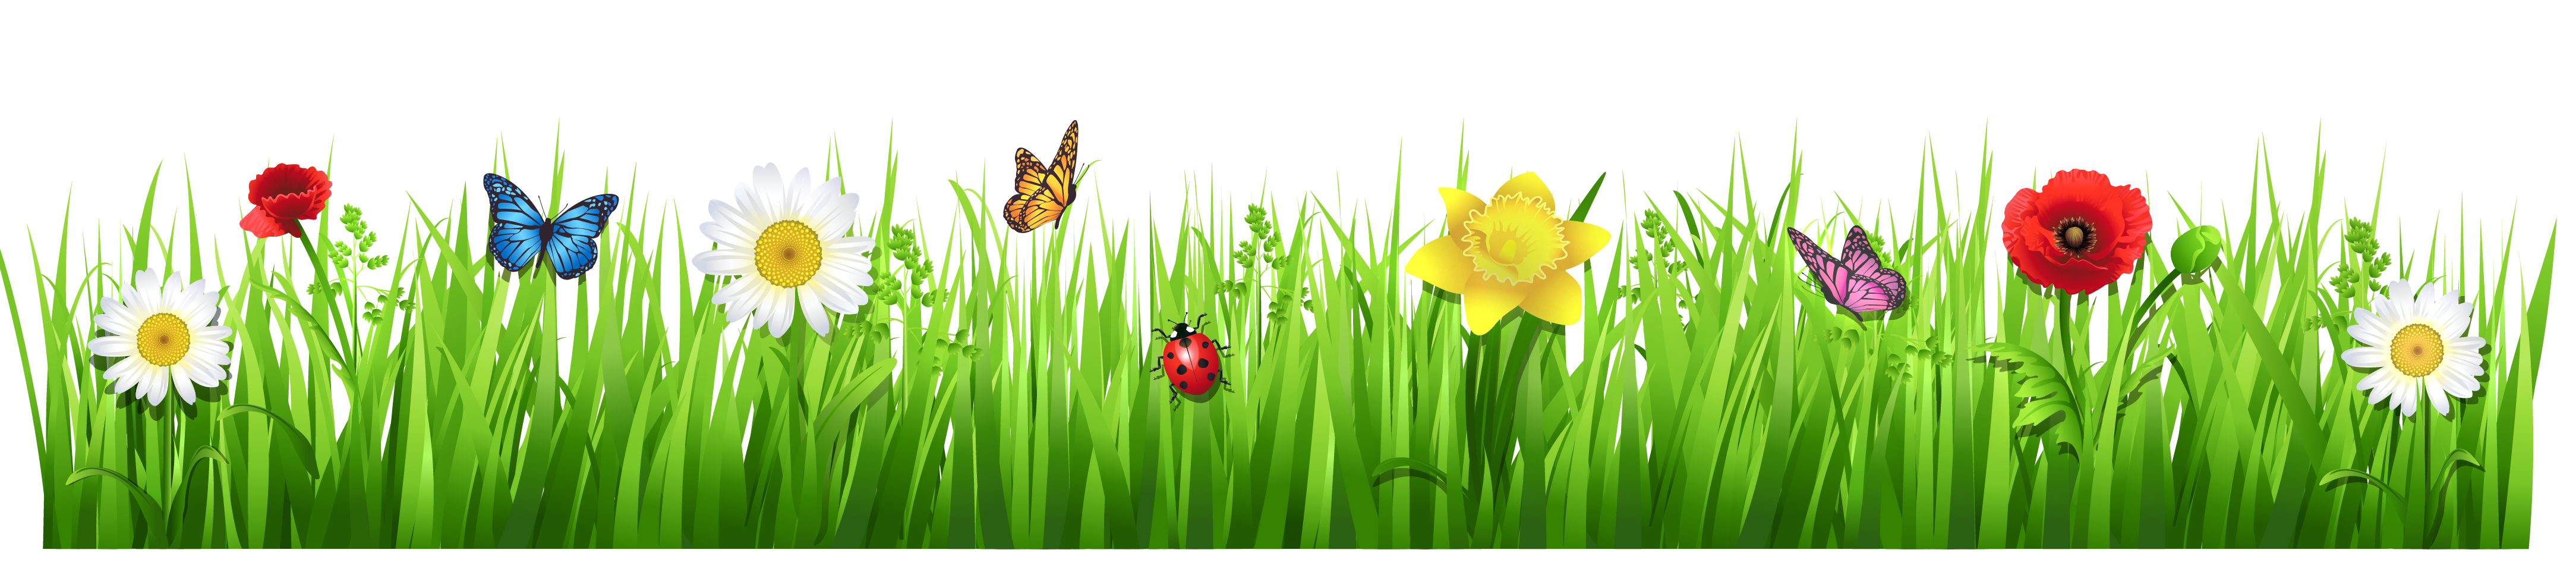 free clipart grass and flowers - photo #2